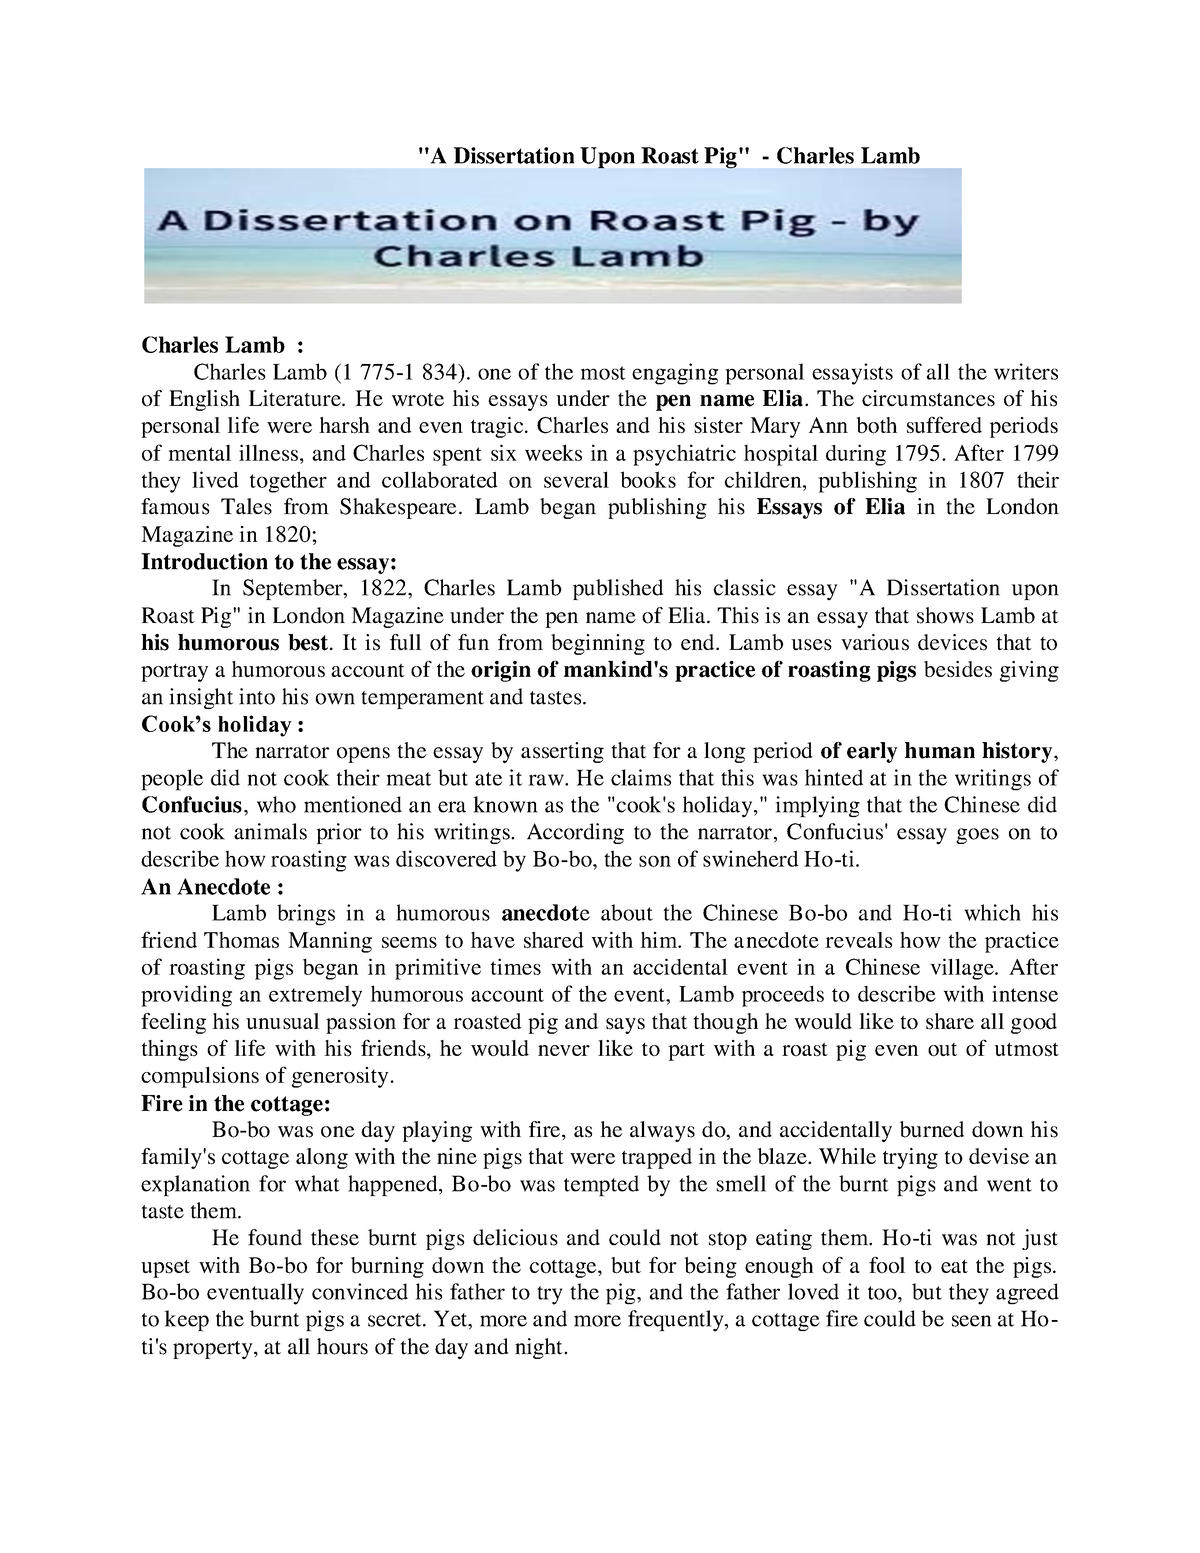 a dissertation upon roast pig questions and answers